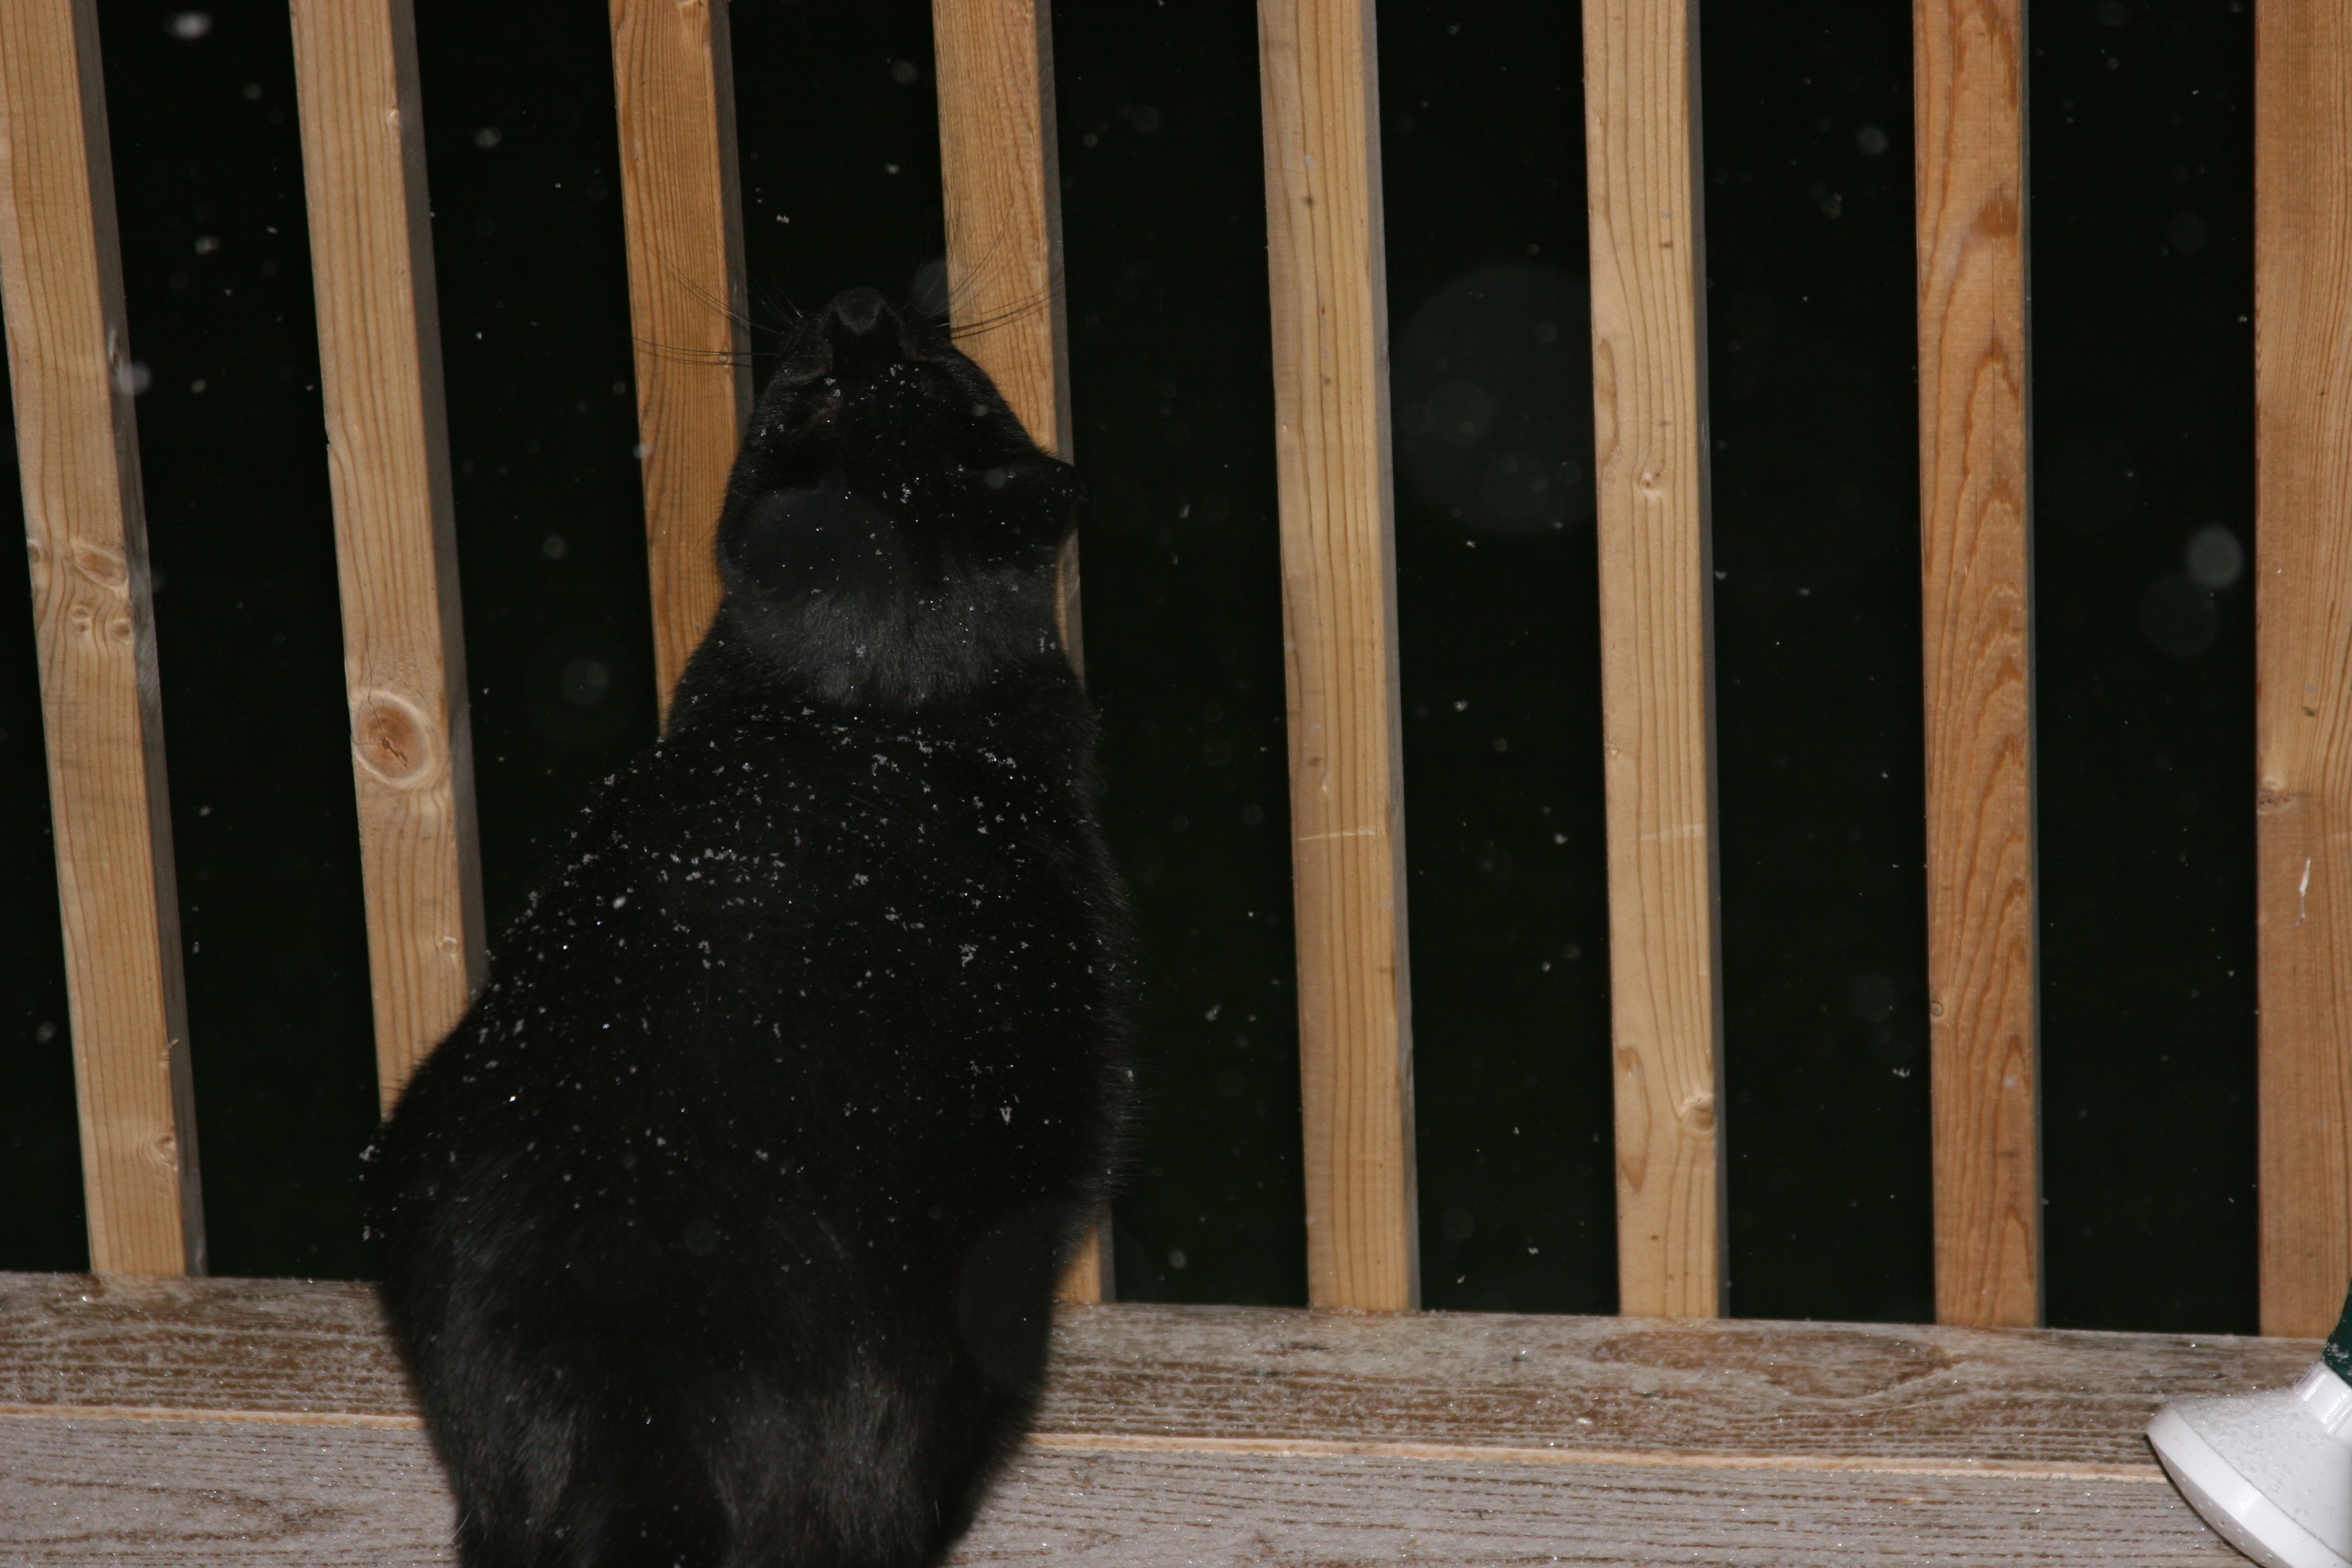 Manny enjoys his first snowfall on the deck of our first house.